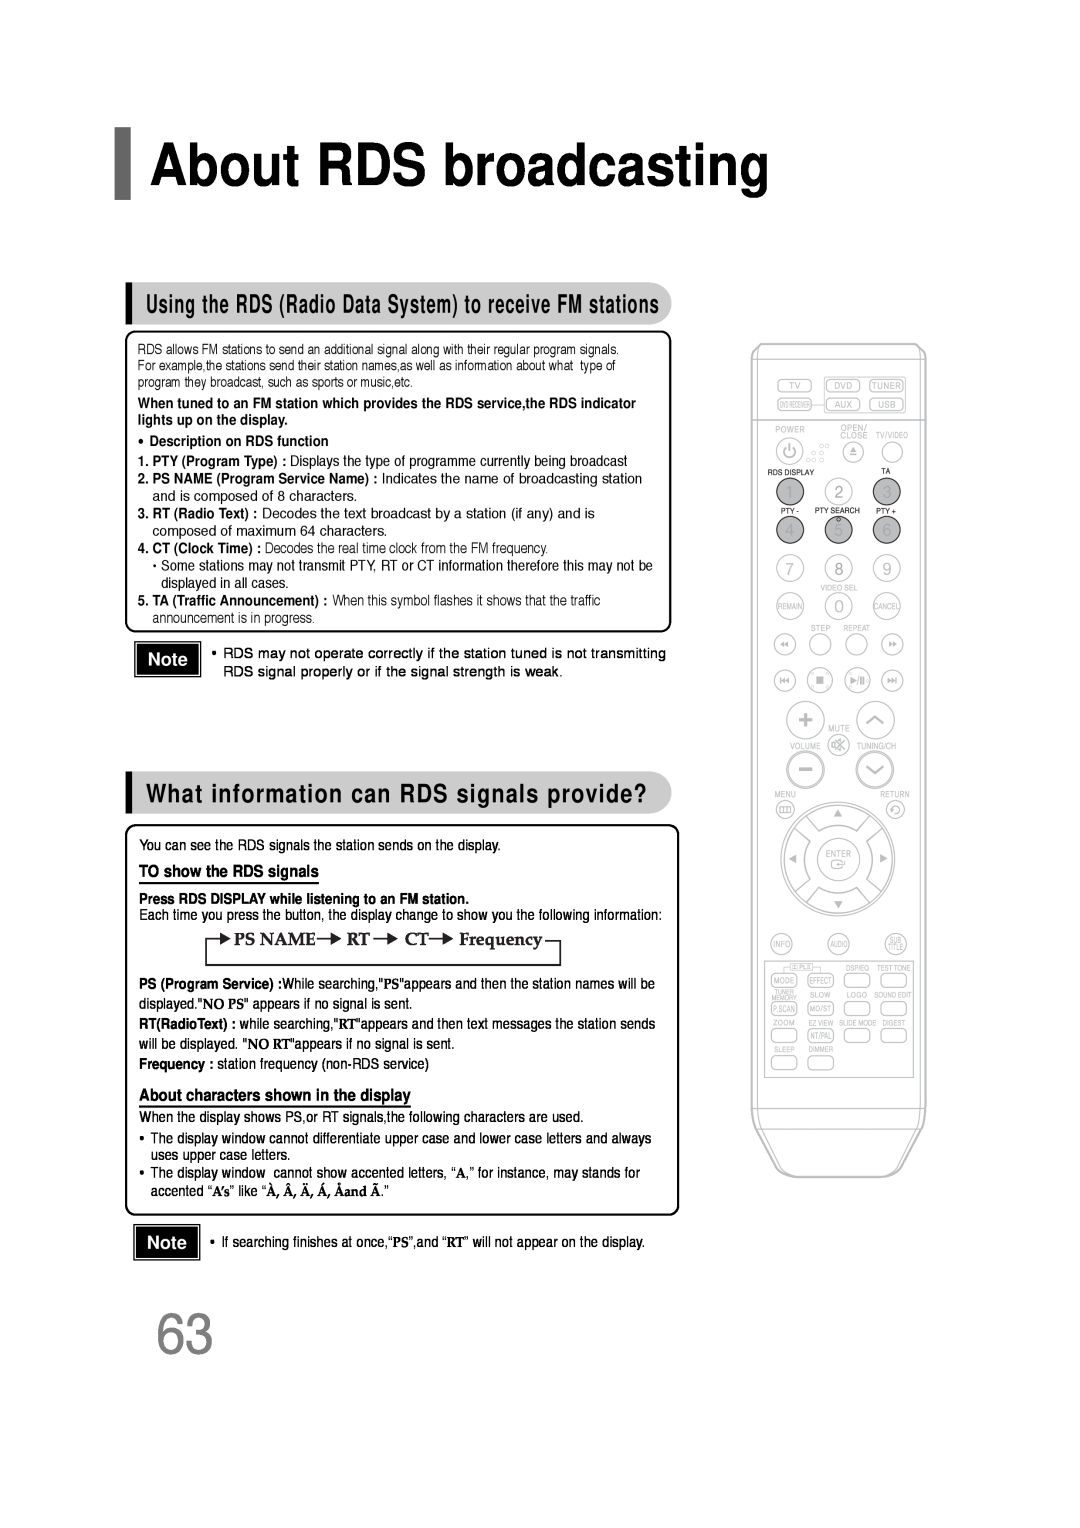 Samsung HT-Q20, HT-TQ22 About RDS broadcasting, What information can RDS signals provide?, Description on RDS function 